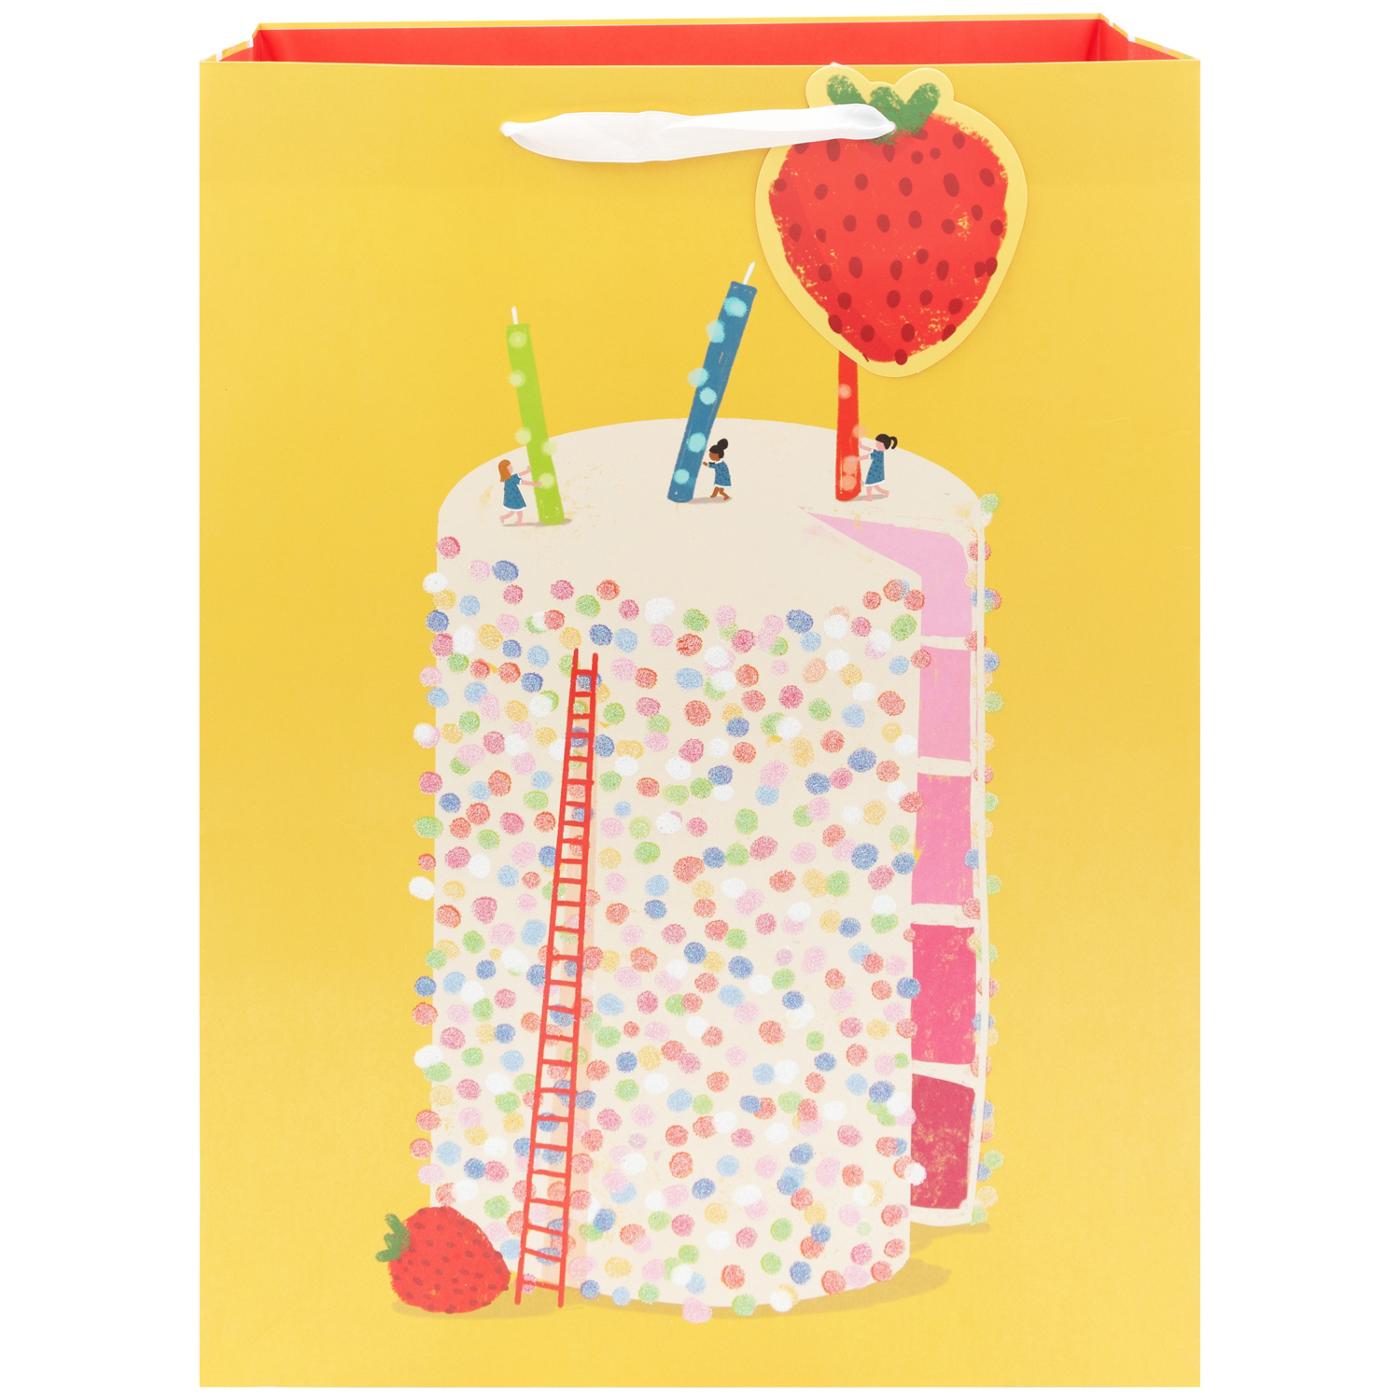 IG Design Tall Strawberry Cake Paper Gift Bag; image 1 of 2